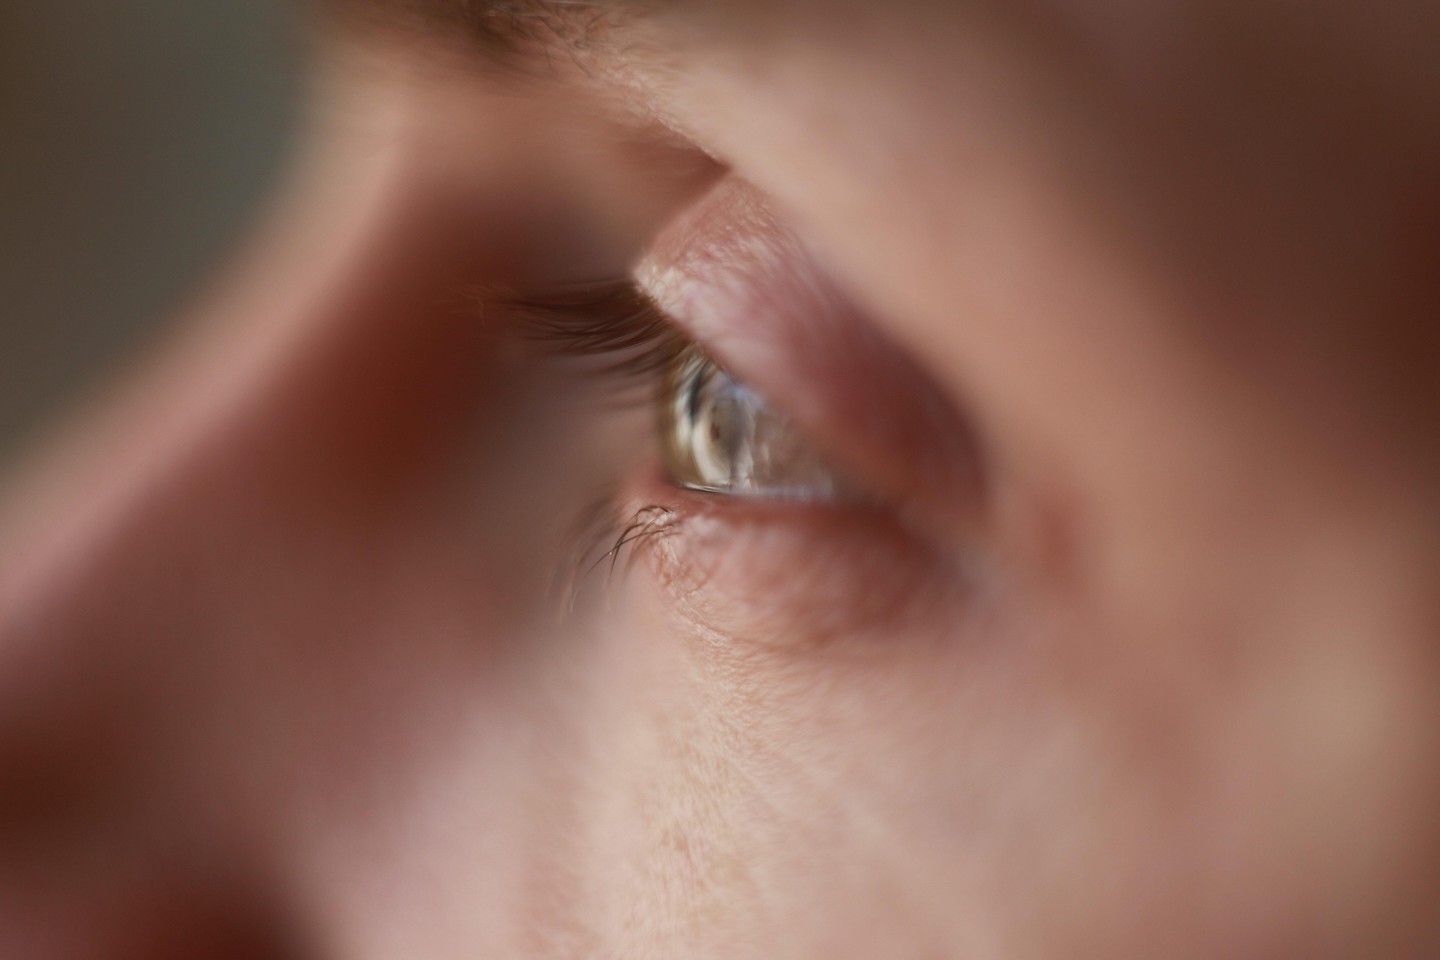 Did you know that vision distortions are a common occurrence after a head inj...